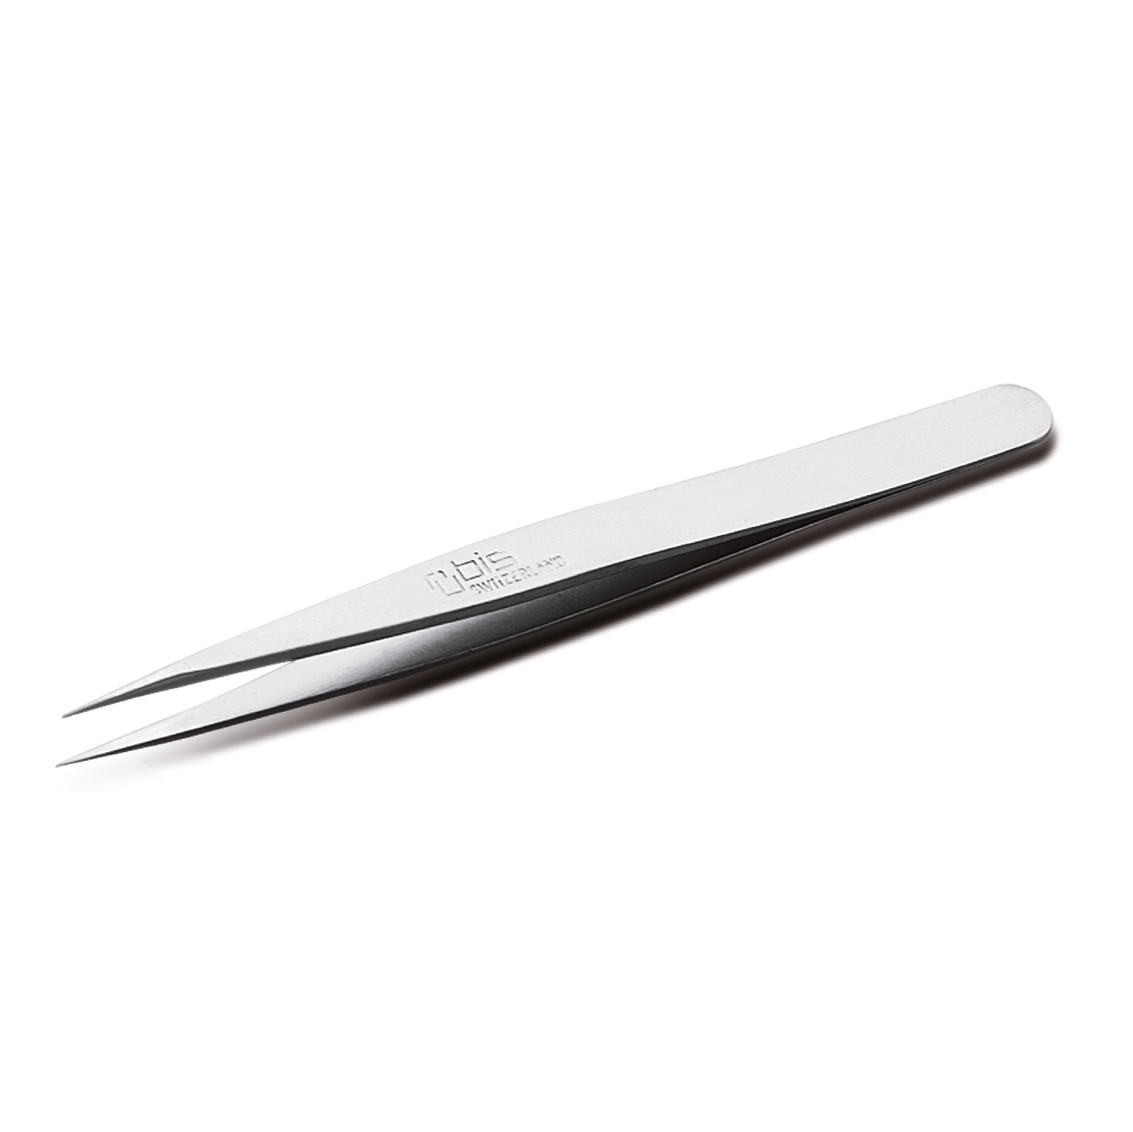 Rubis Professional Tweezers for subcutaneous hair in Stainless Steel with Sharp Tip